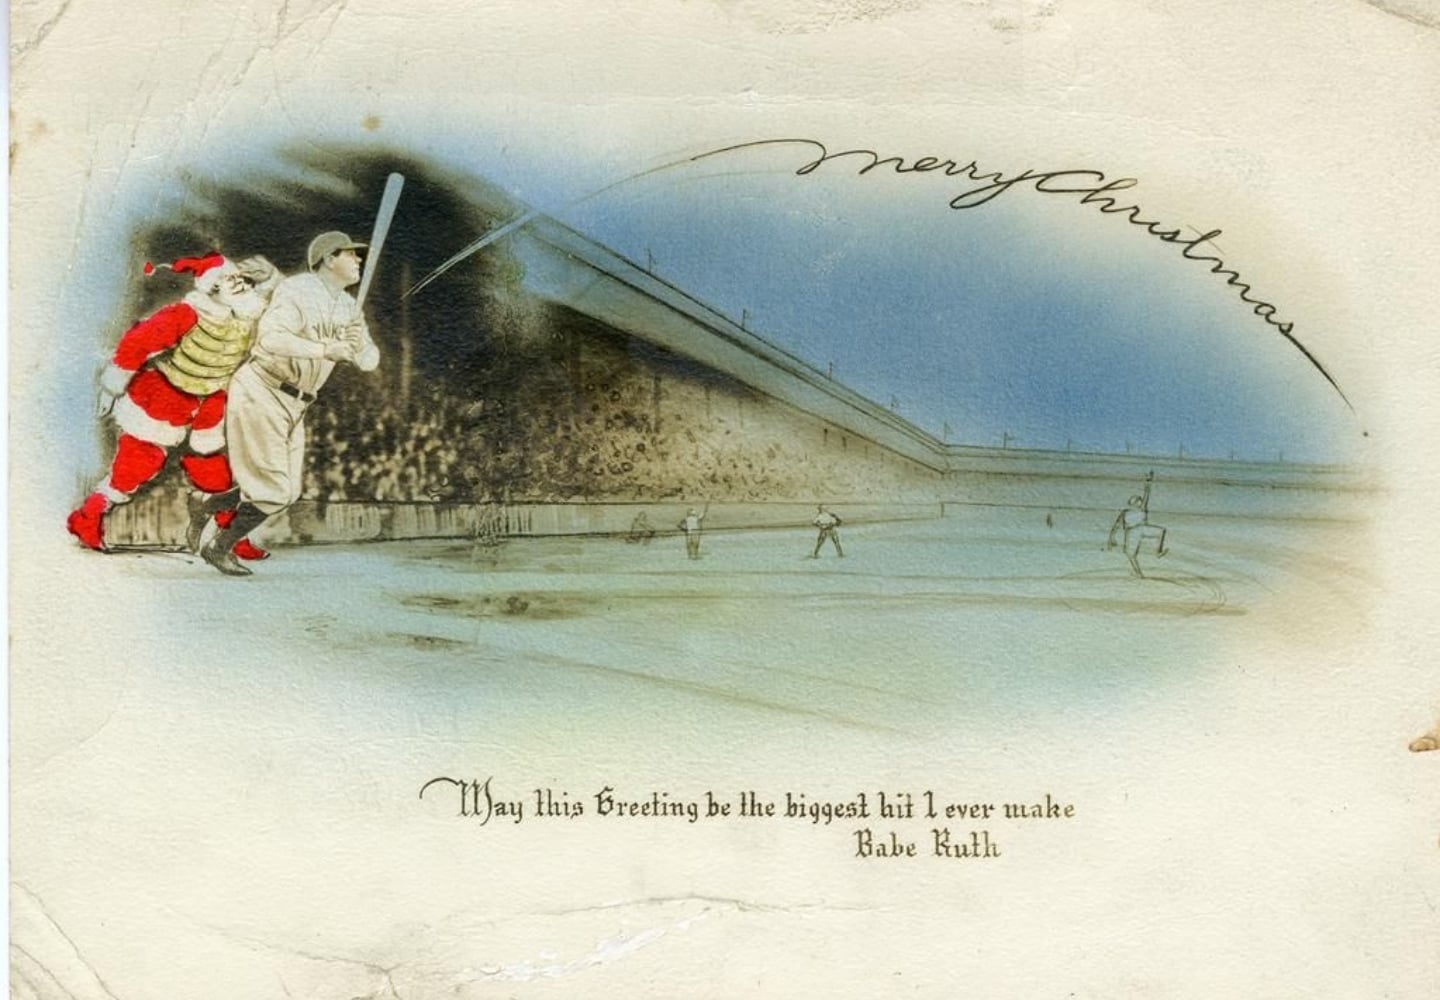 Vintage Babe Ruth Christmas Card. nolie caught this game. 